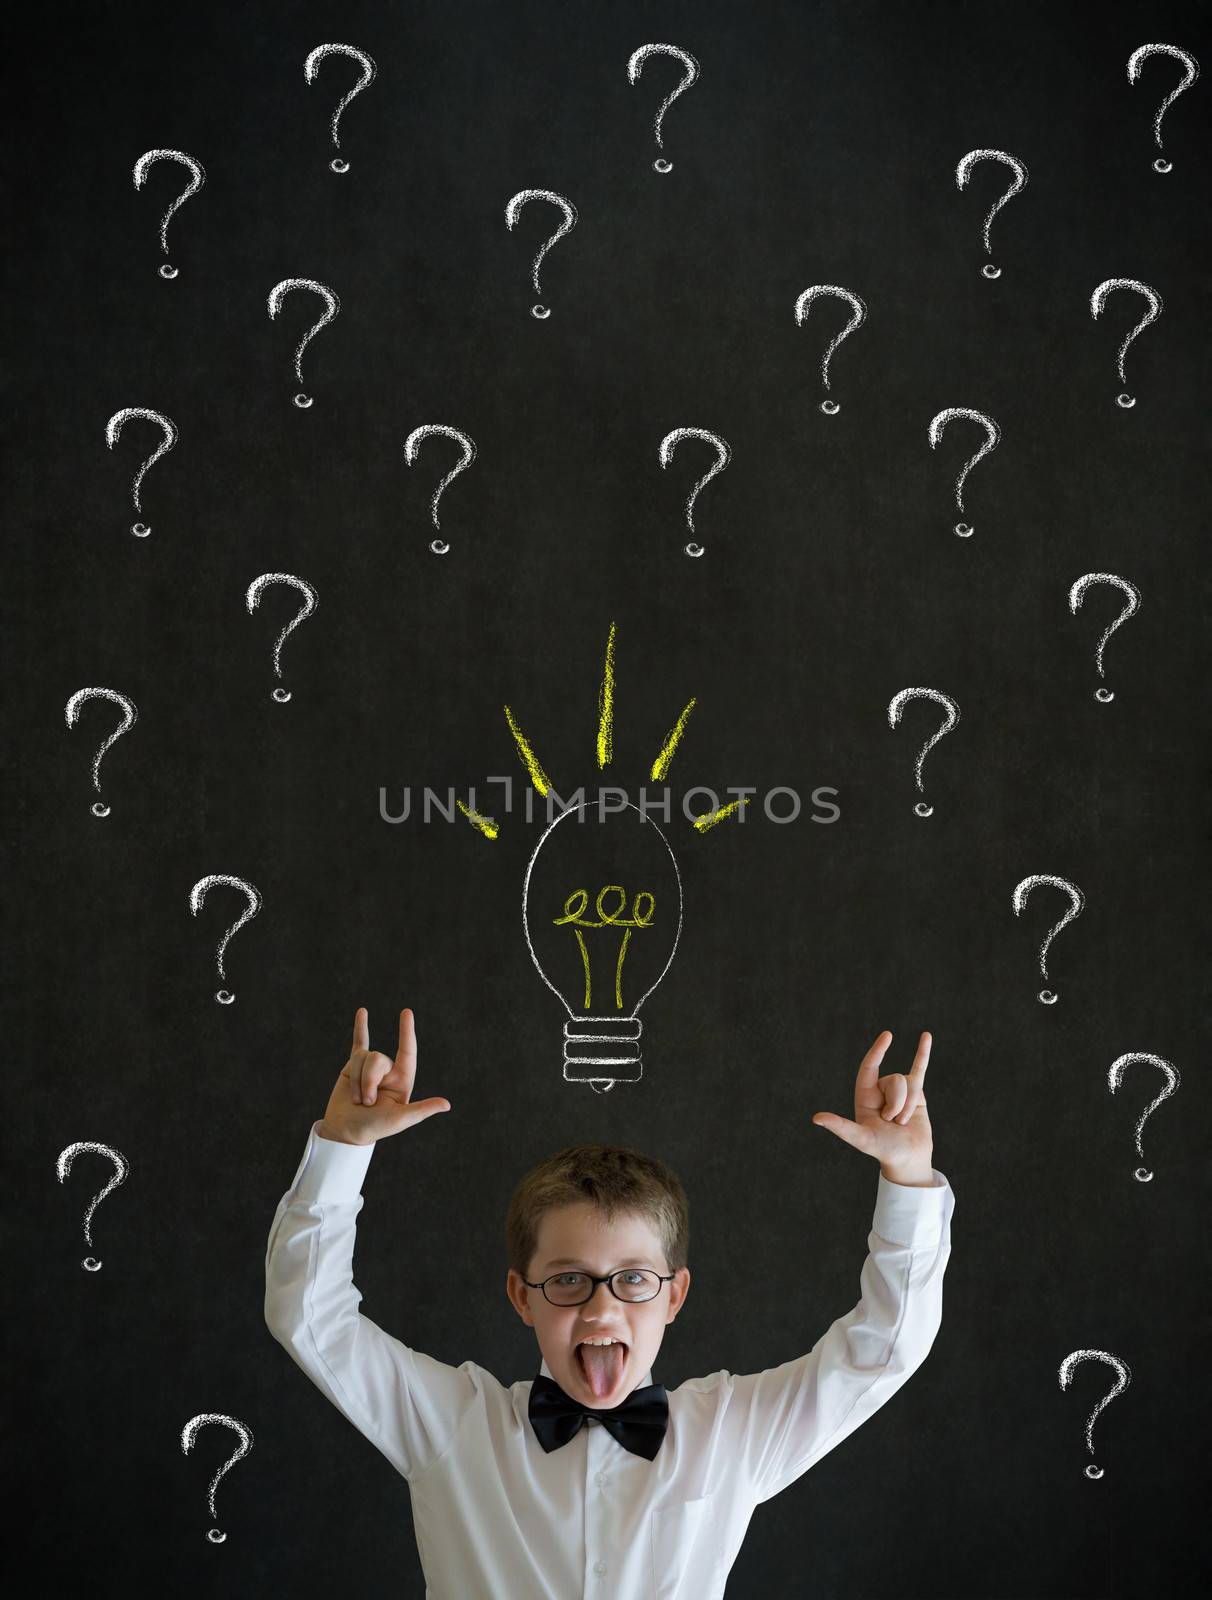 Knowledge rocks dressed up as business man questioning ideas on blackboard background